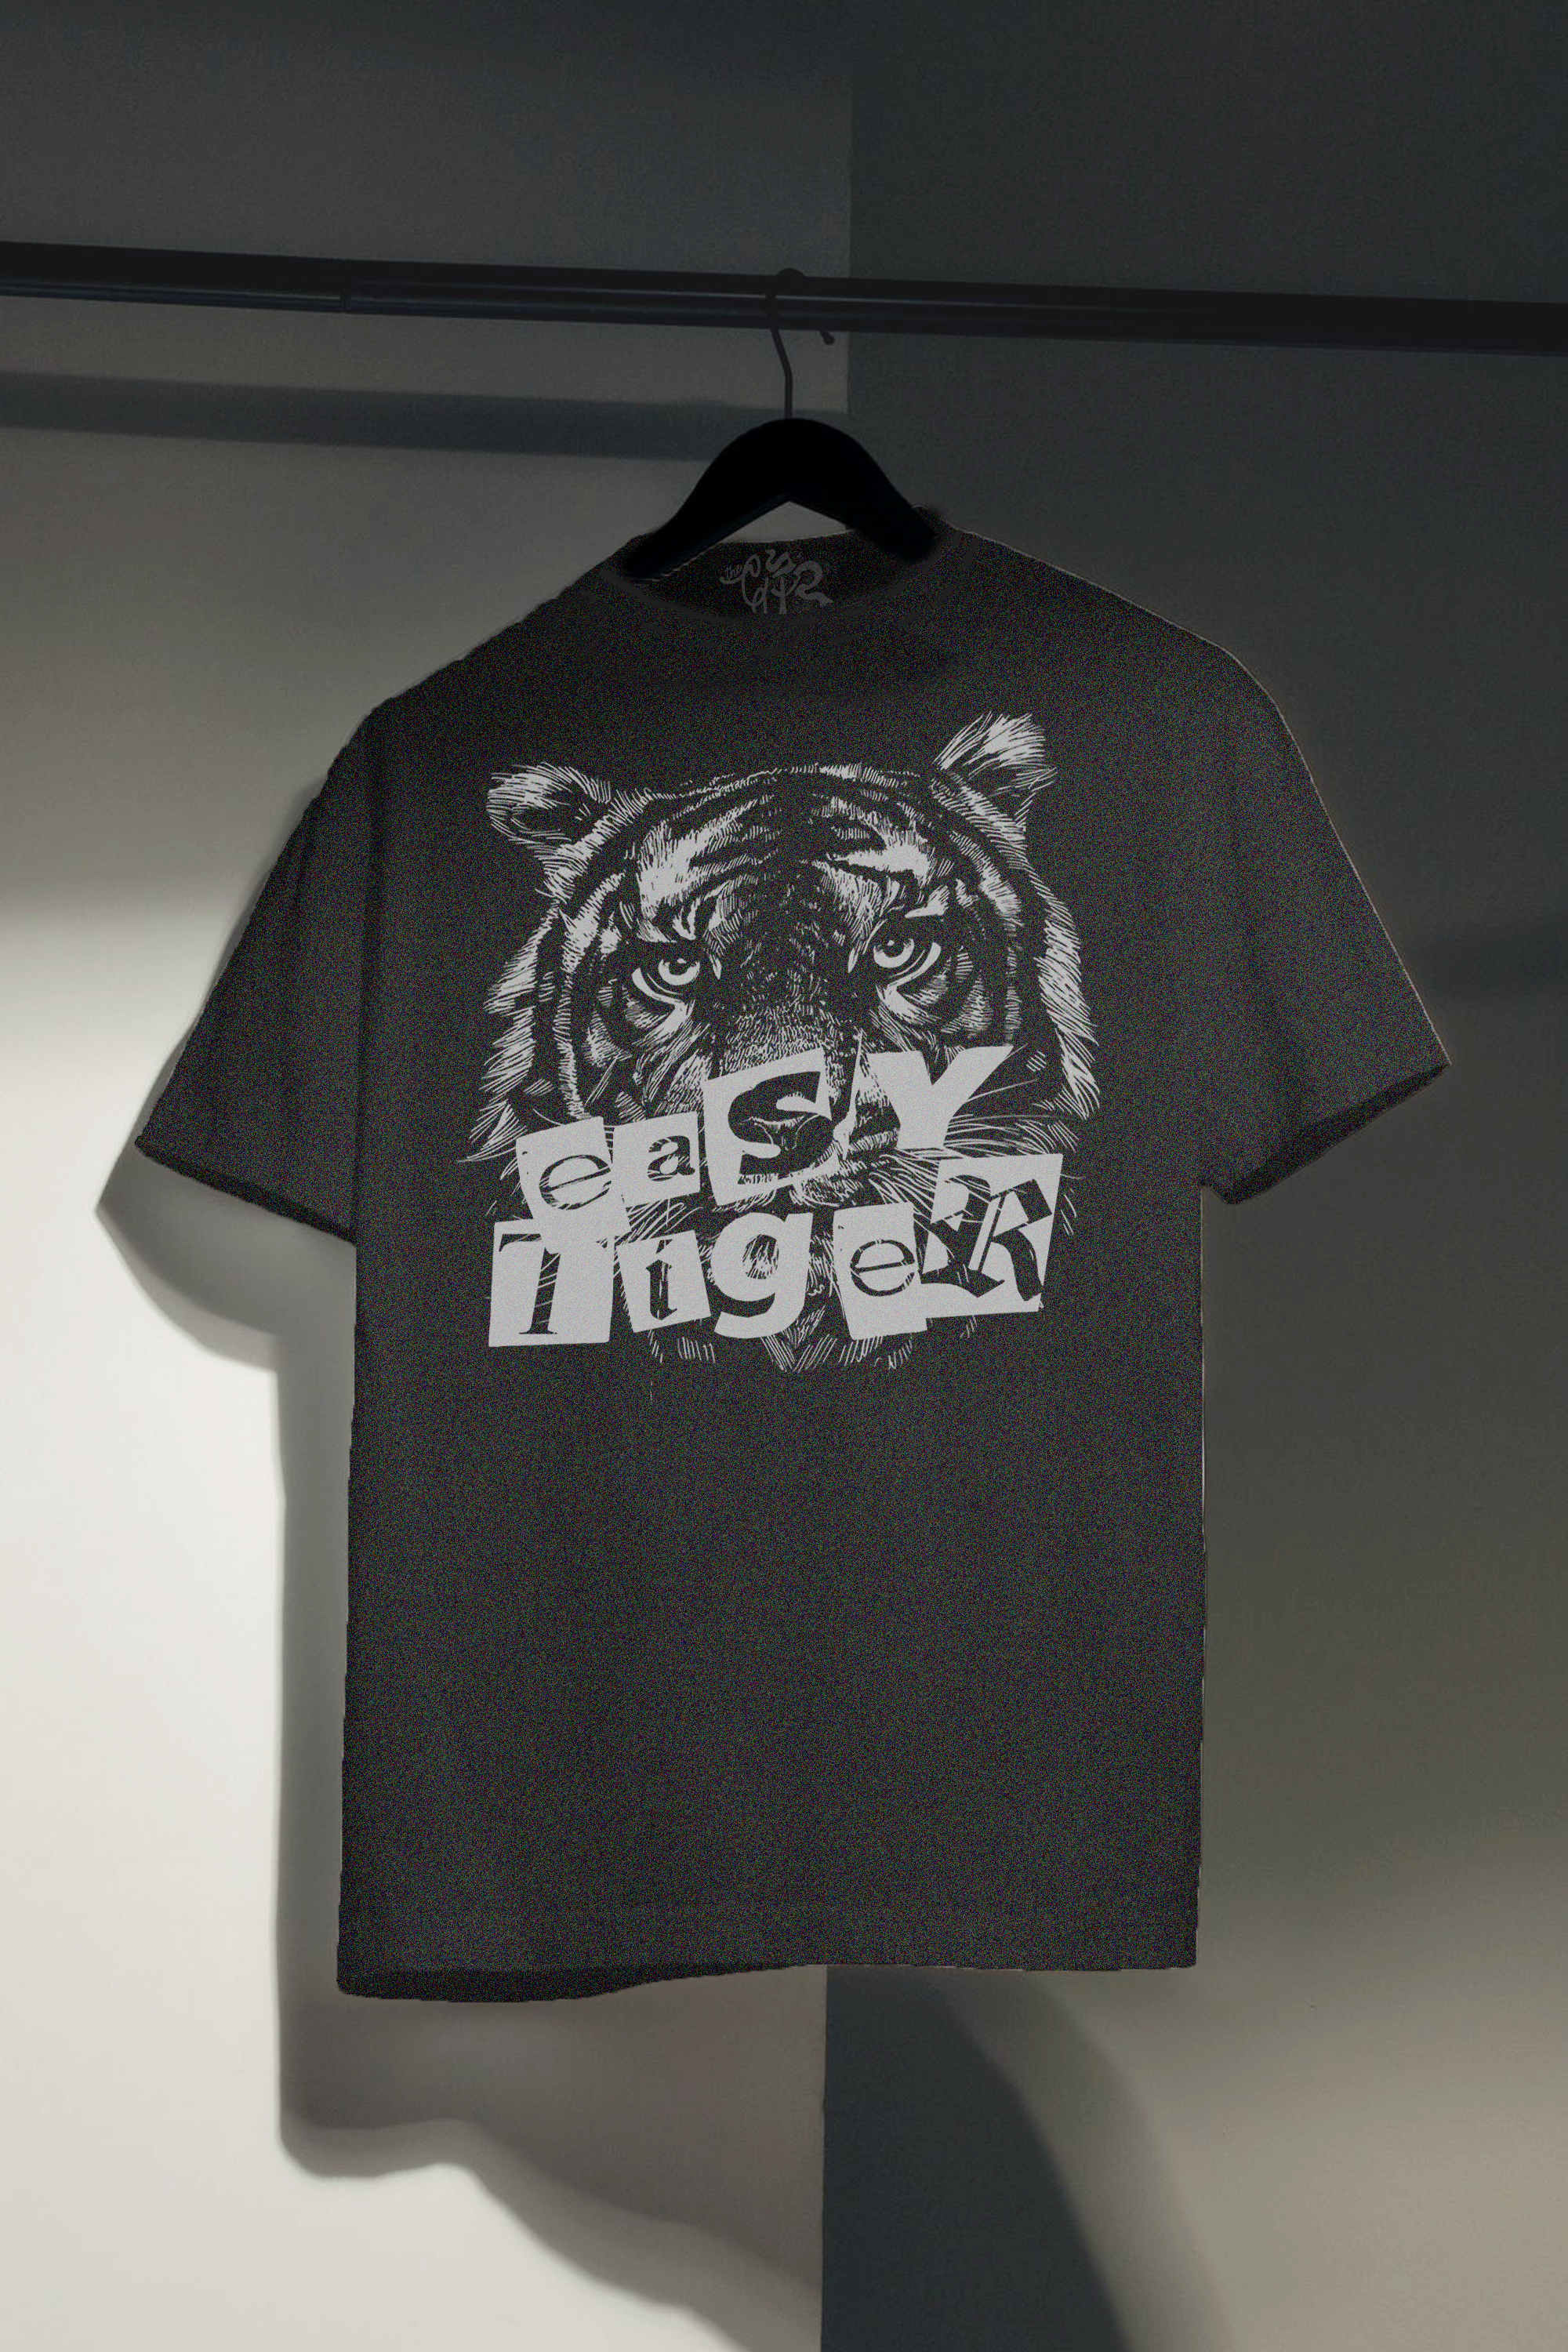 Easy Tiger Oversized TShirt | Vintage Washed Graphic Tee